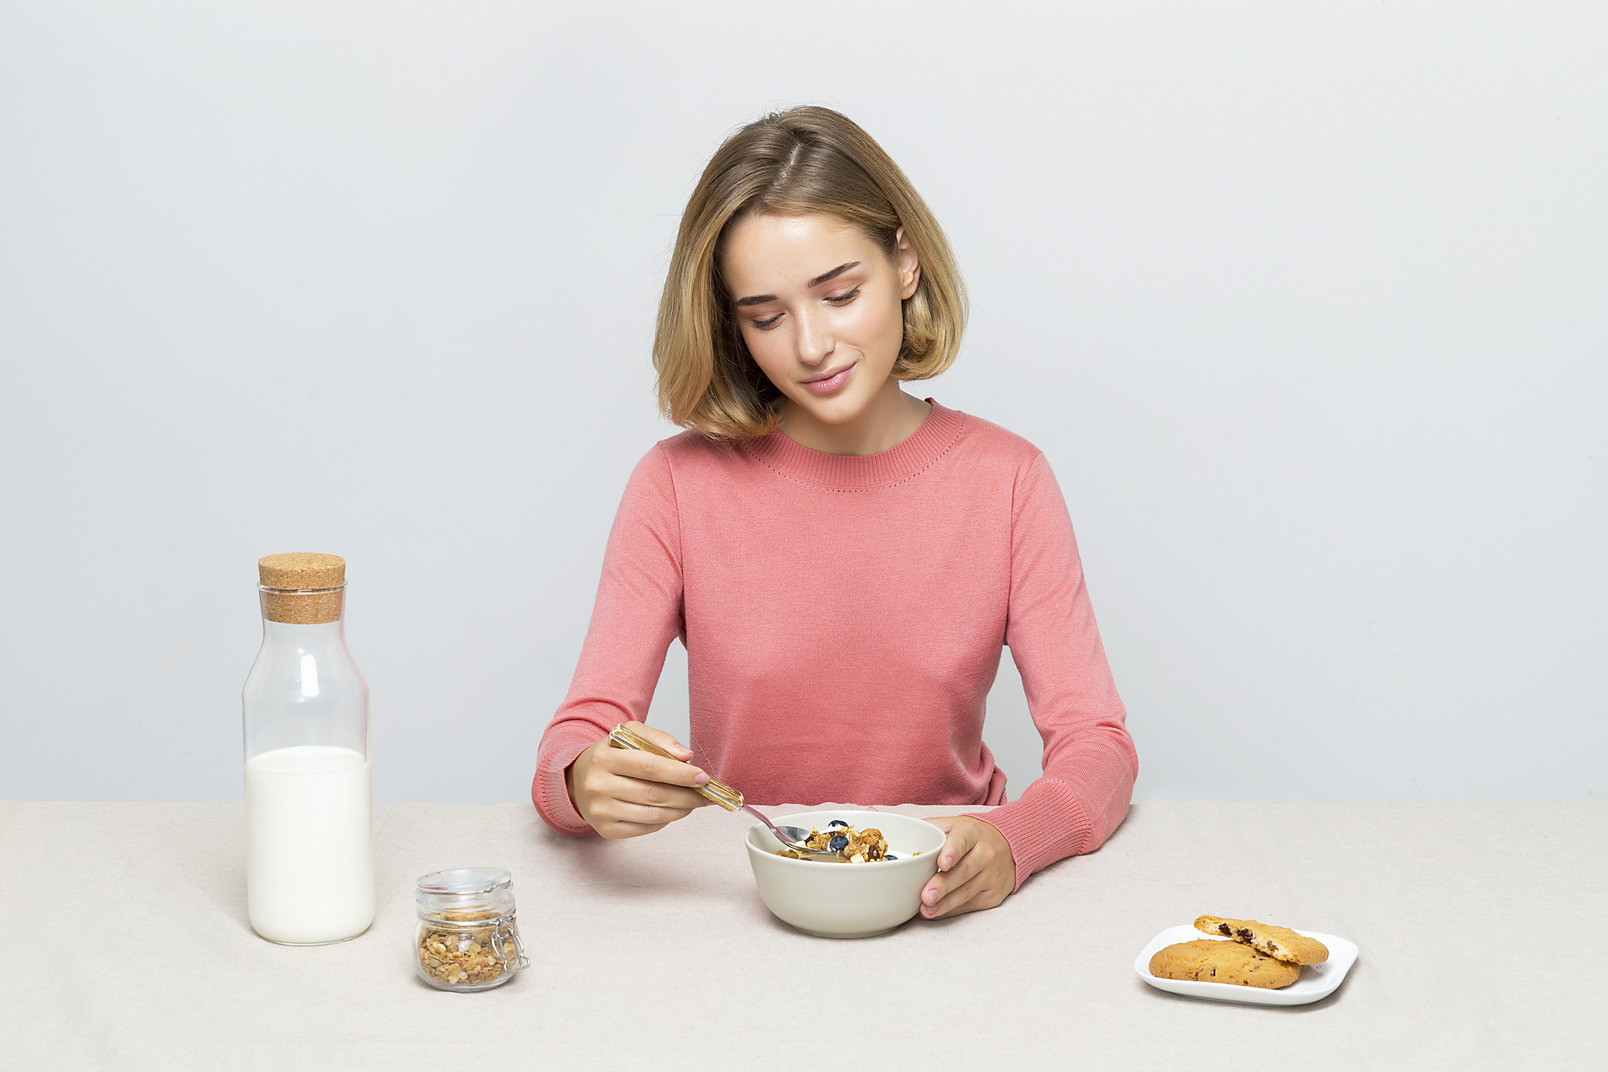 Young girl eating cereal with milk